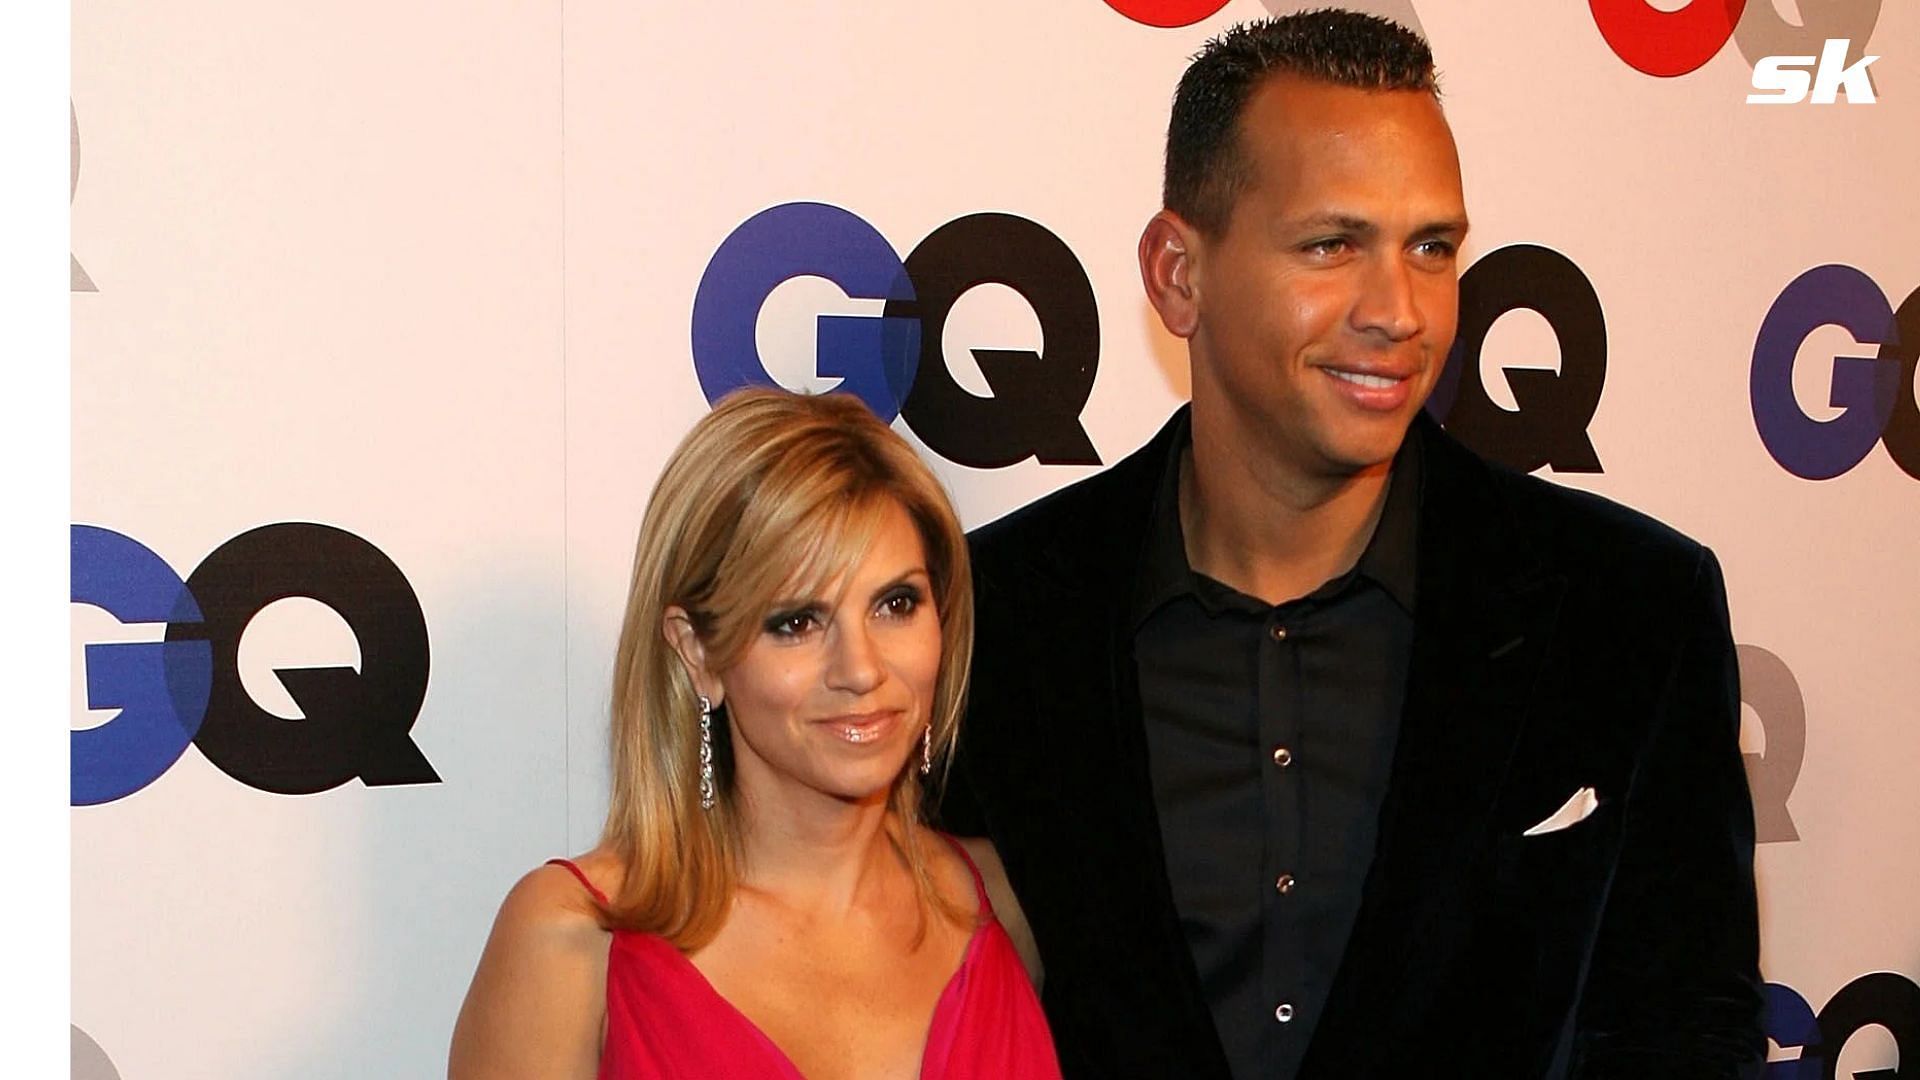 In pictures: Alex Rodriguez shares adorable photos to mark ex-wife